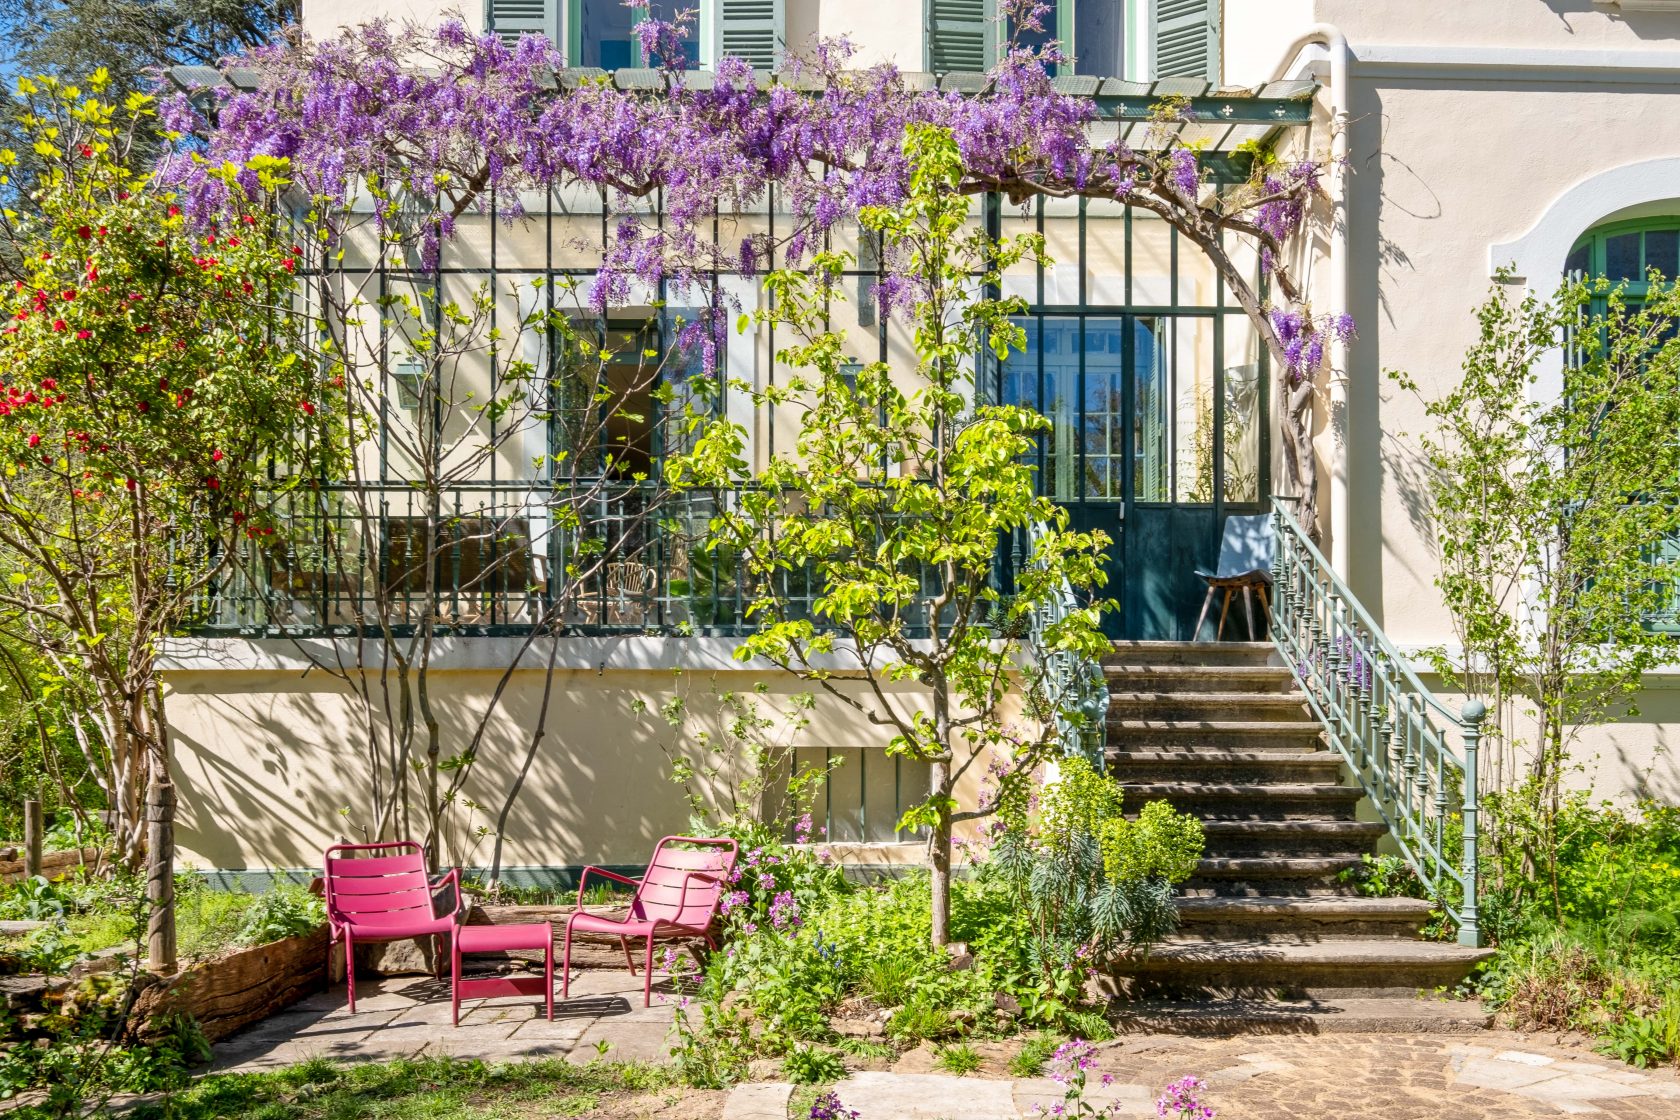 5 bedroom Bourgeoise house close to the quays of Saône and Ile Barbe